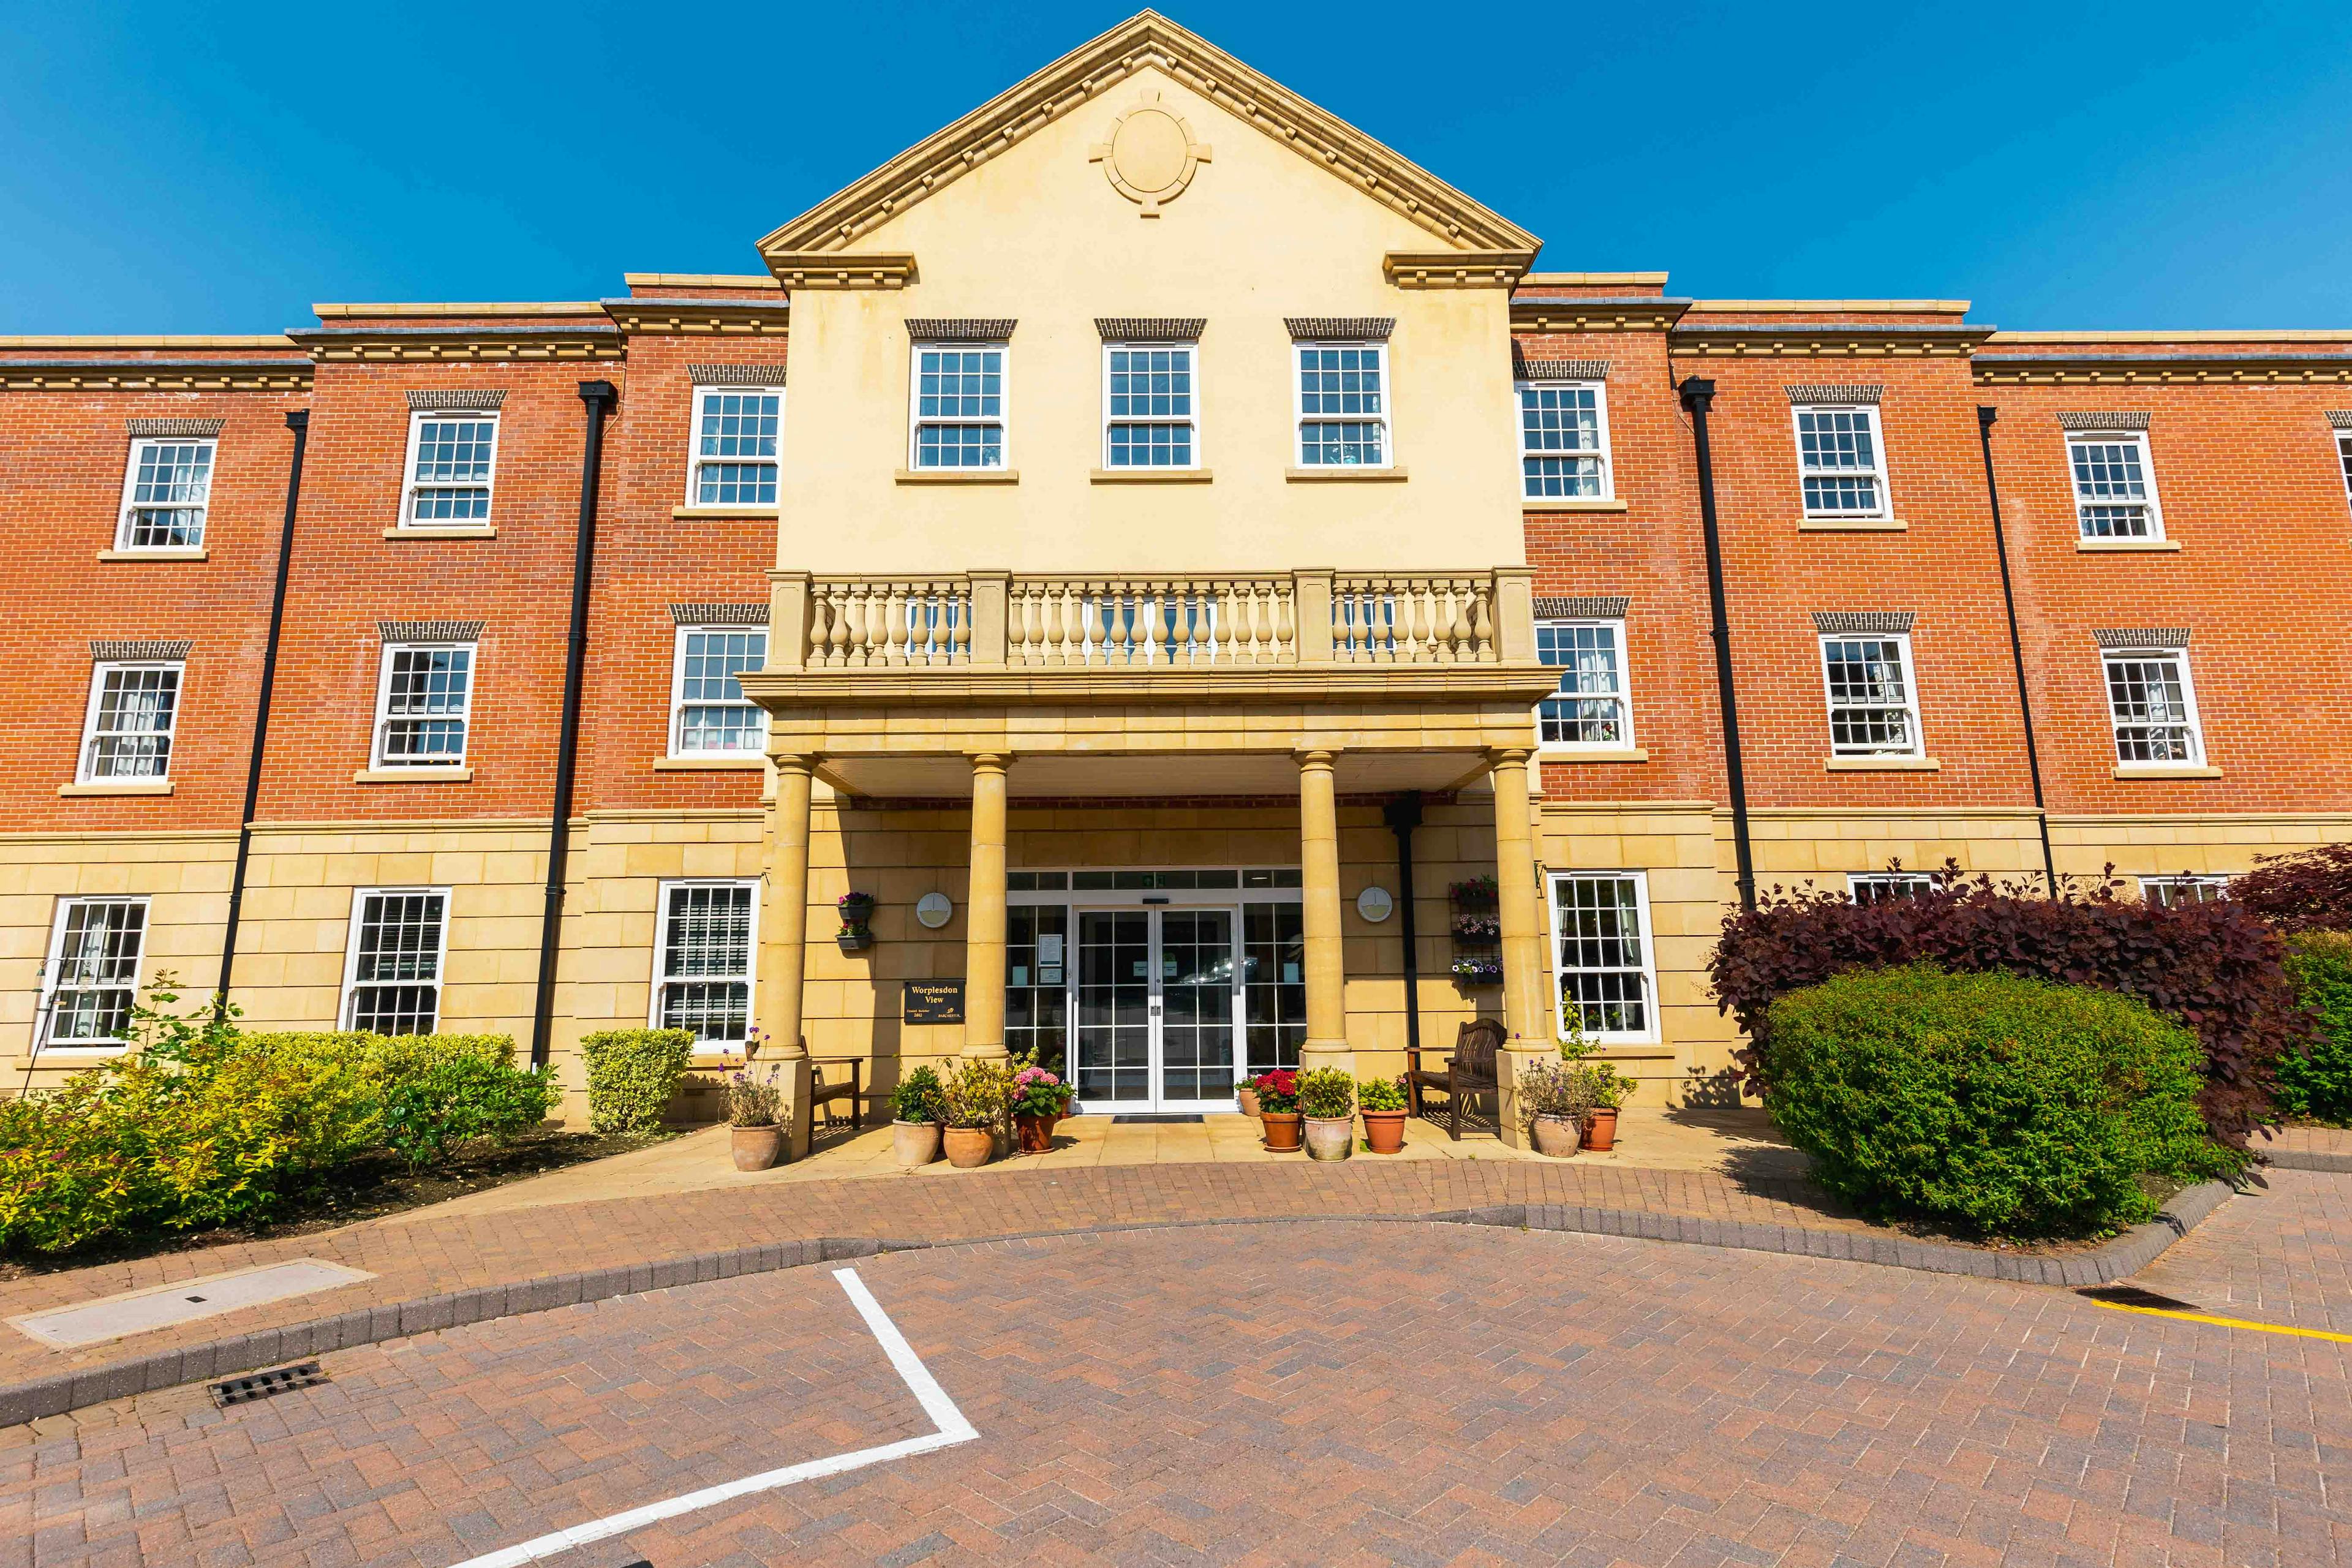 Exterior of Worplesdon View Care Home in Guildford, Surrey